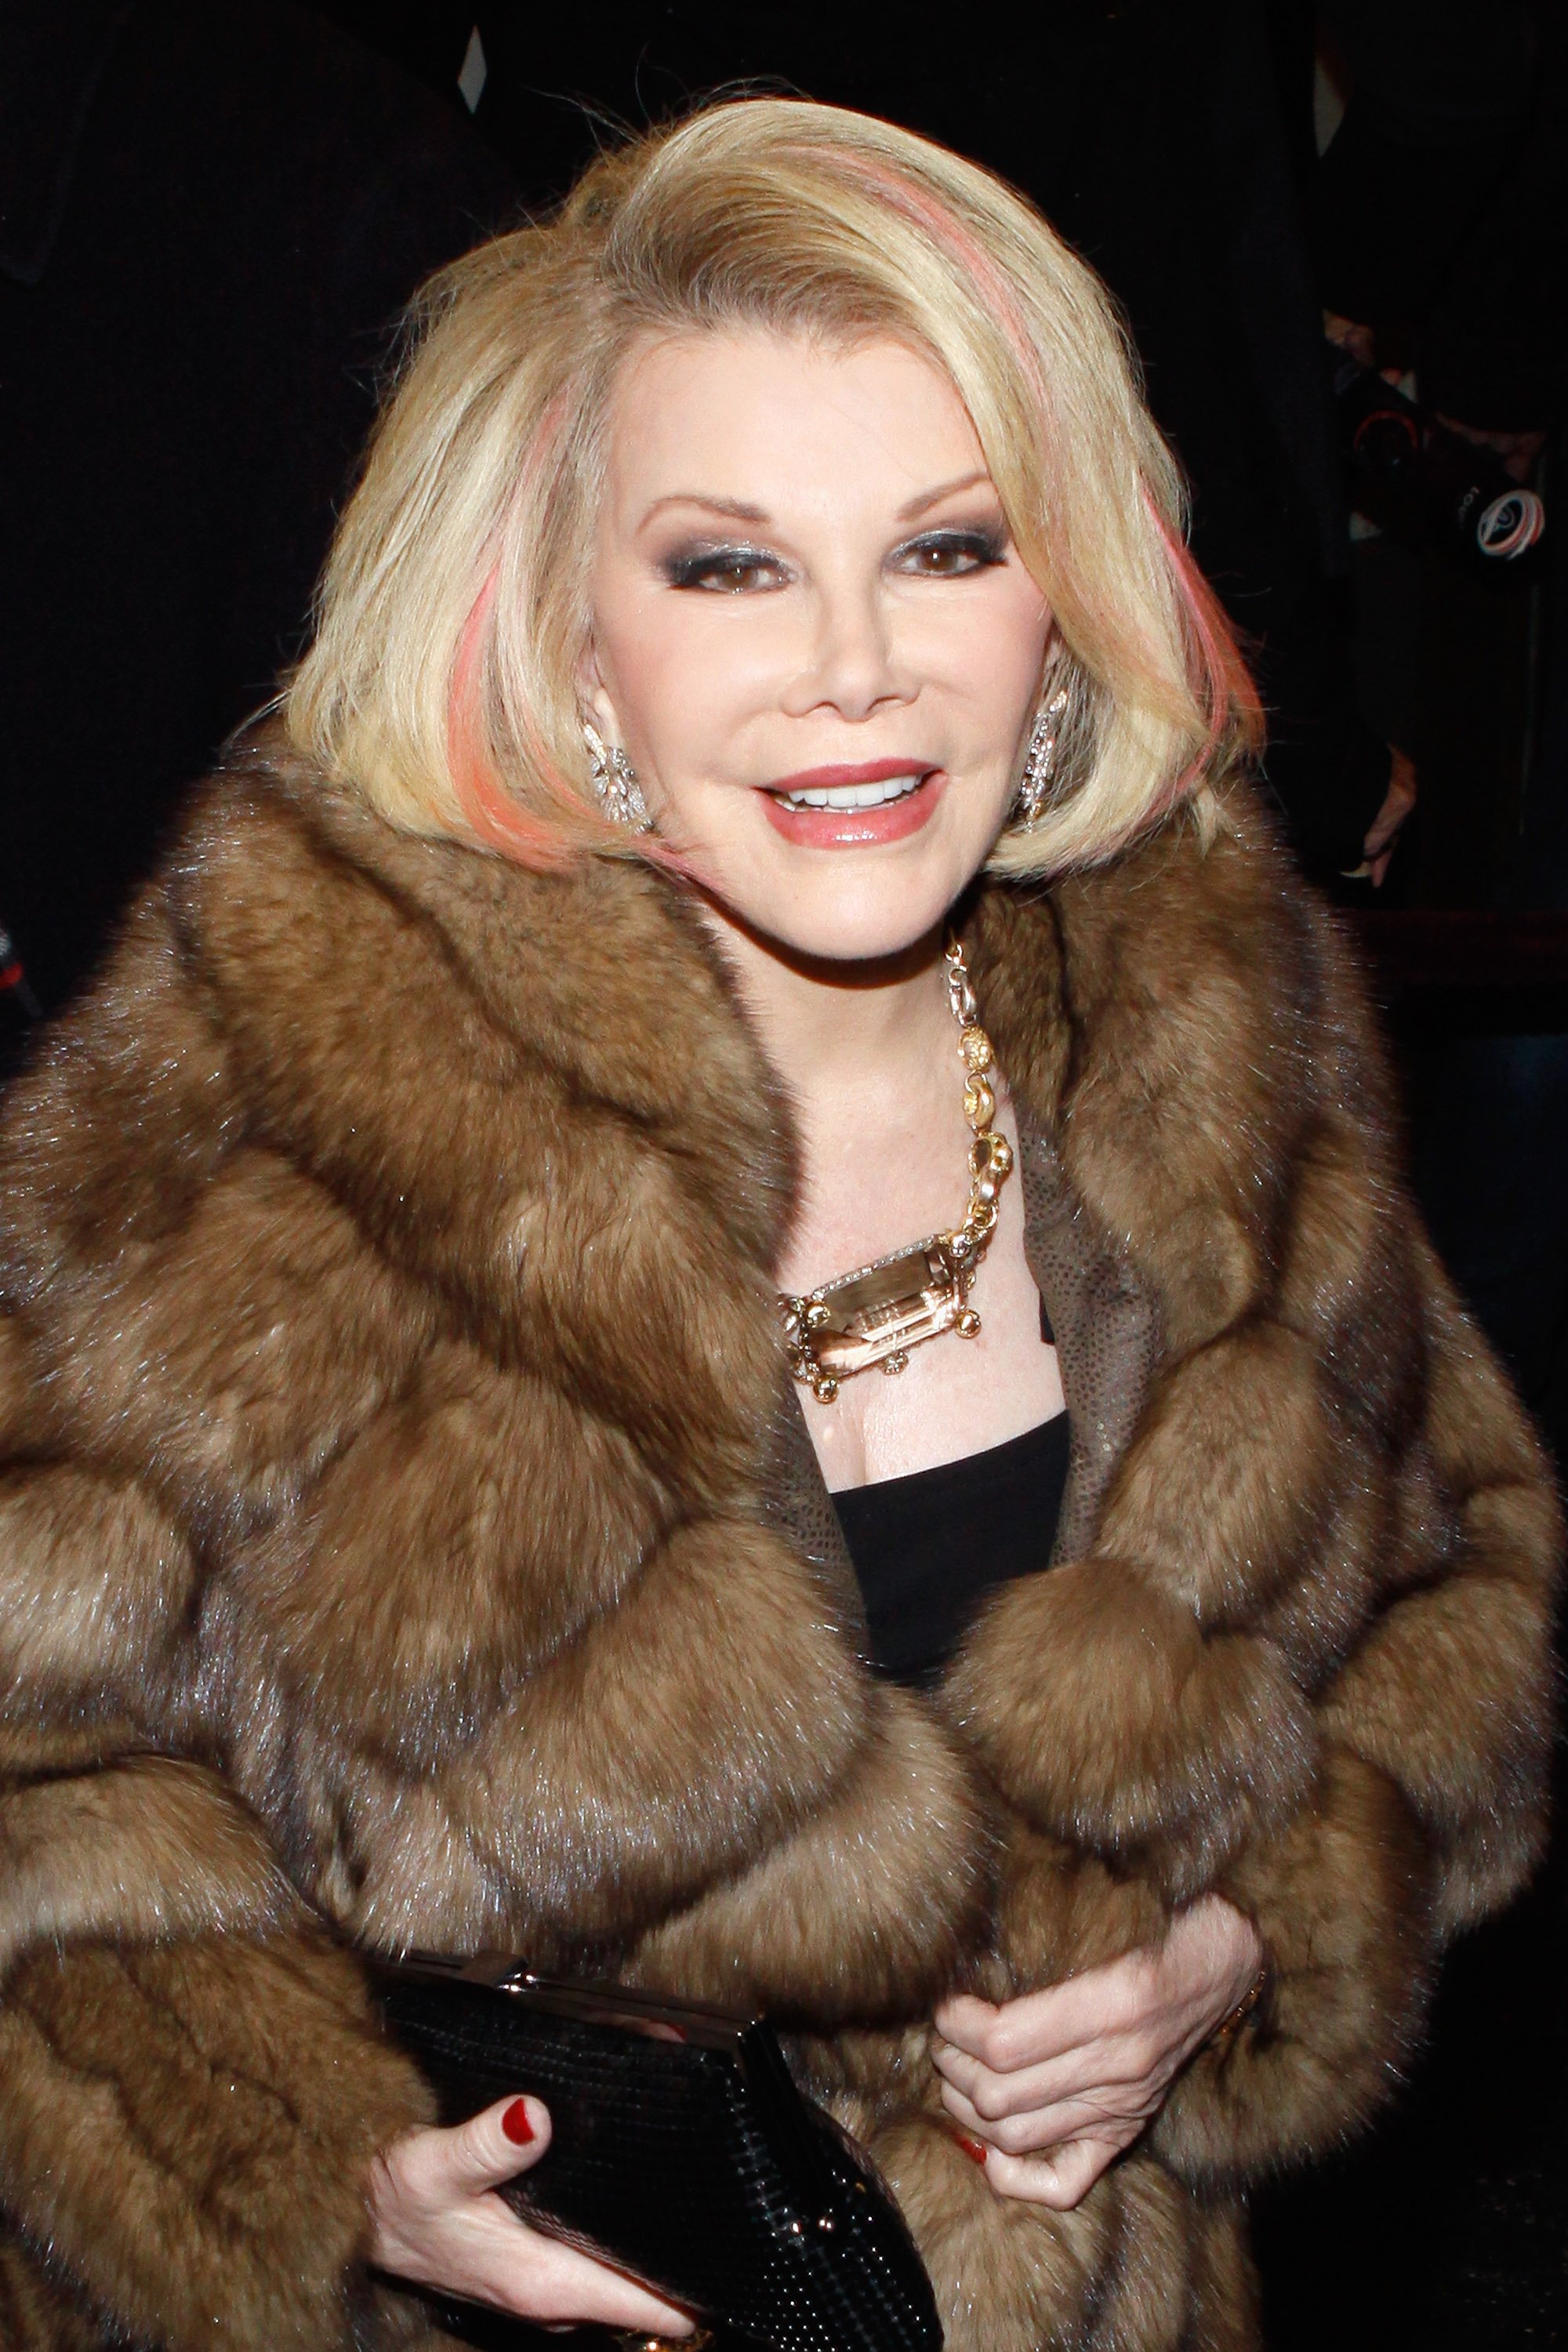 Joan Rivers attends "The Best Man" Broadway Opening night in New York on April 1, 2012 | Photo: Getty Images